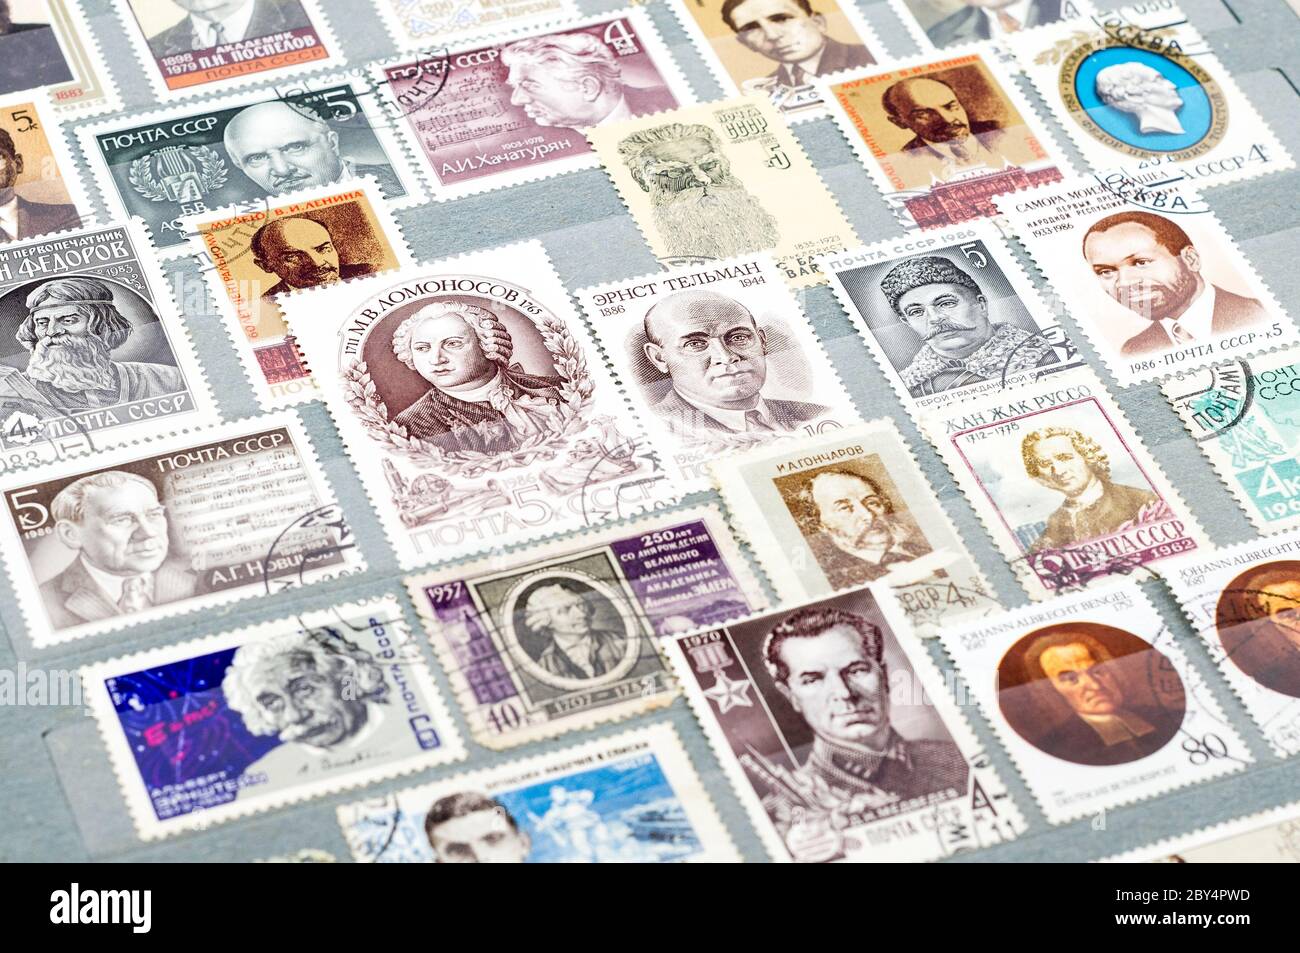 Vintage CCCP (Russia) postage stamps in book Stock Photo